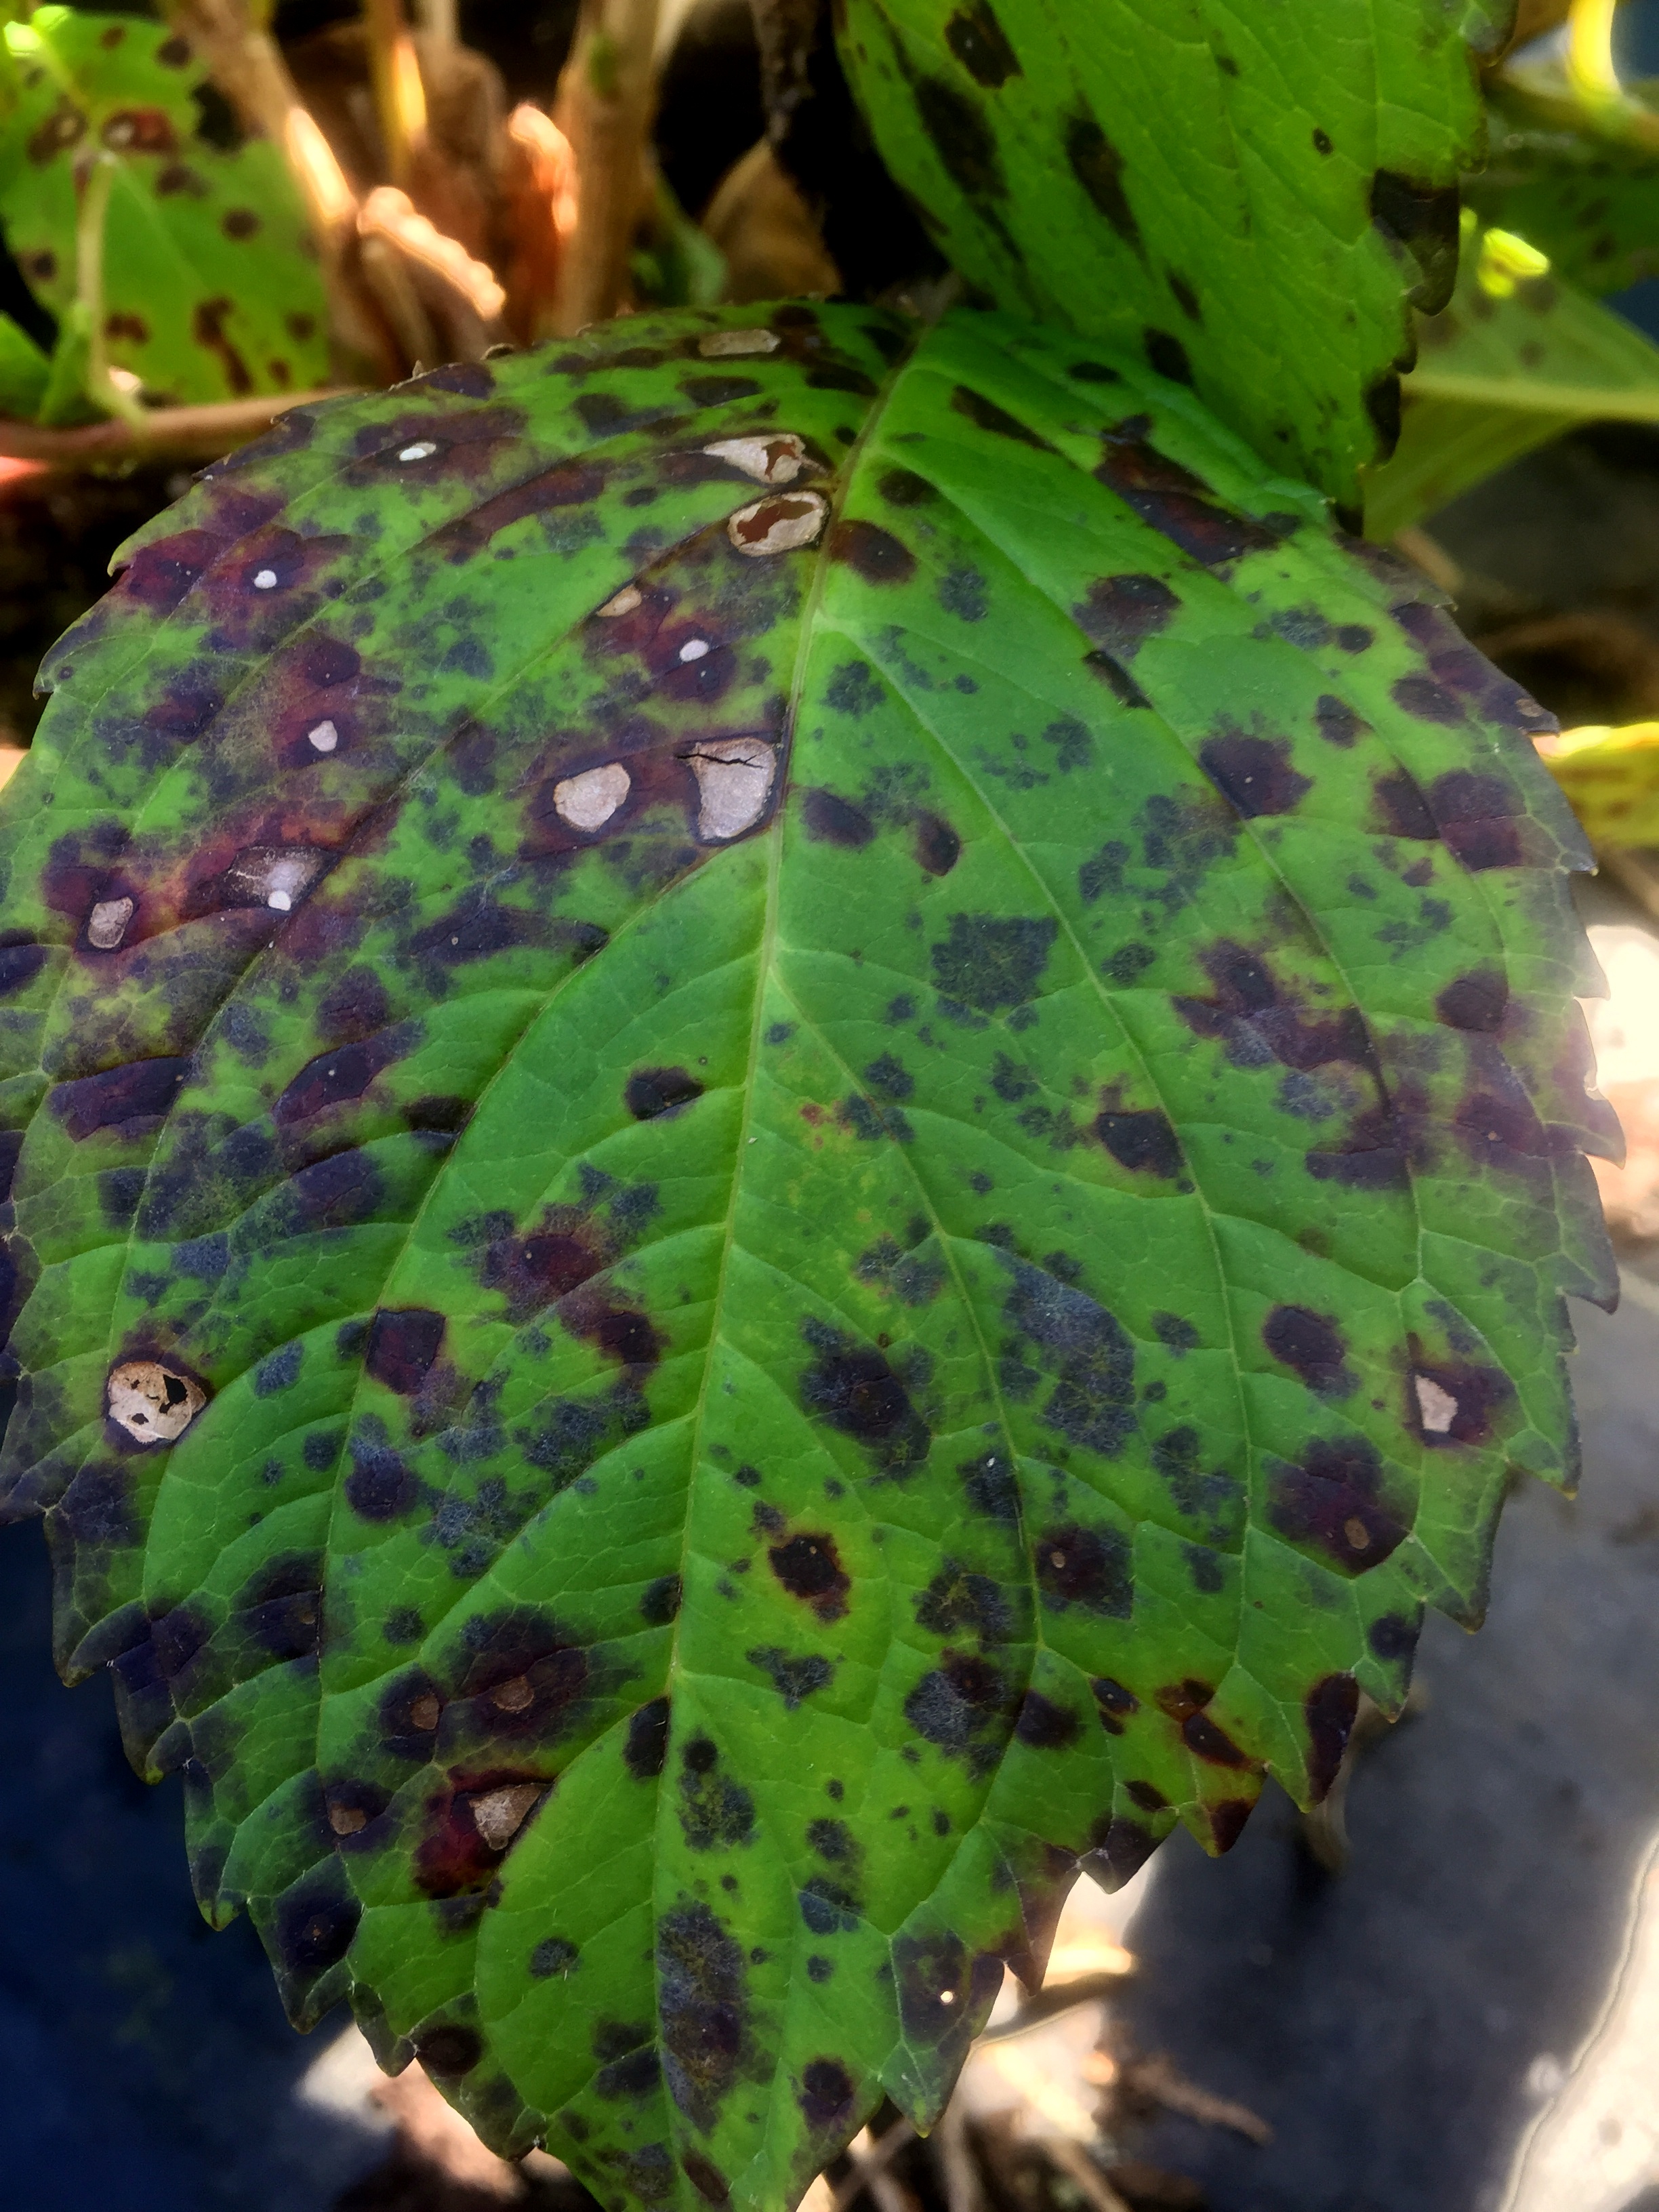 How to use compost tea to treat brown spots on hydrangeas